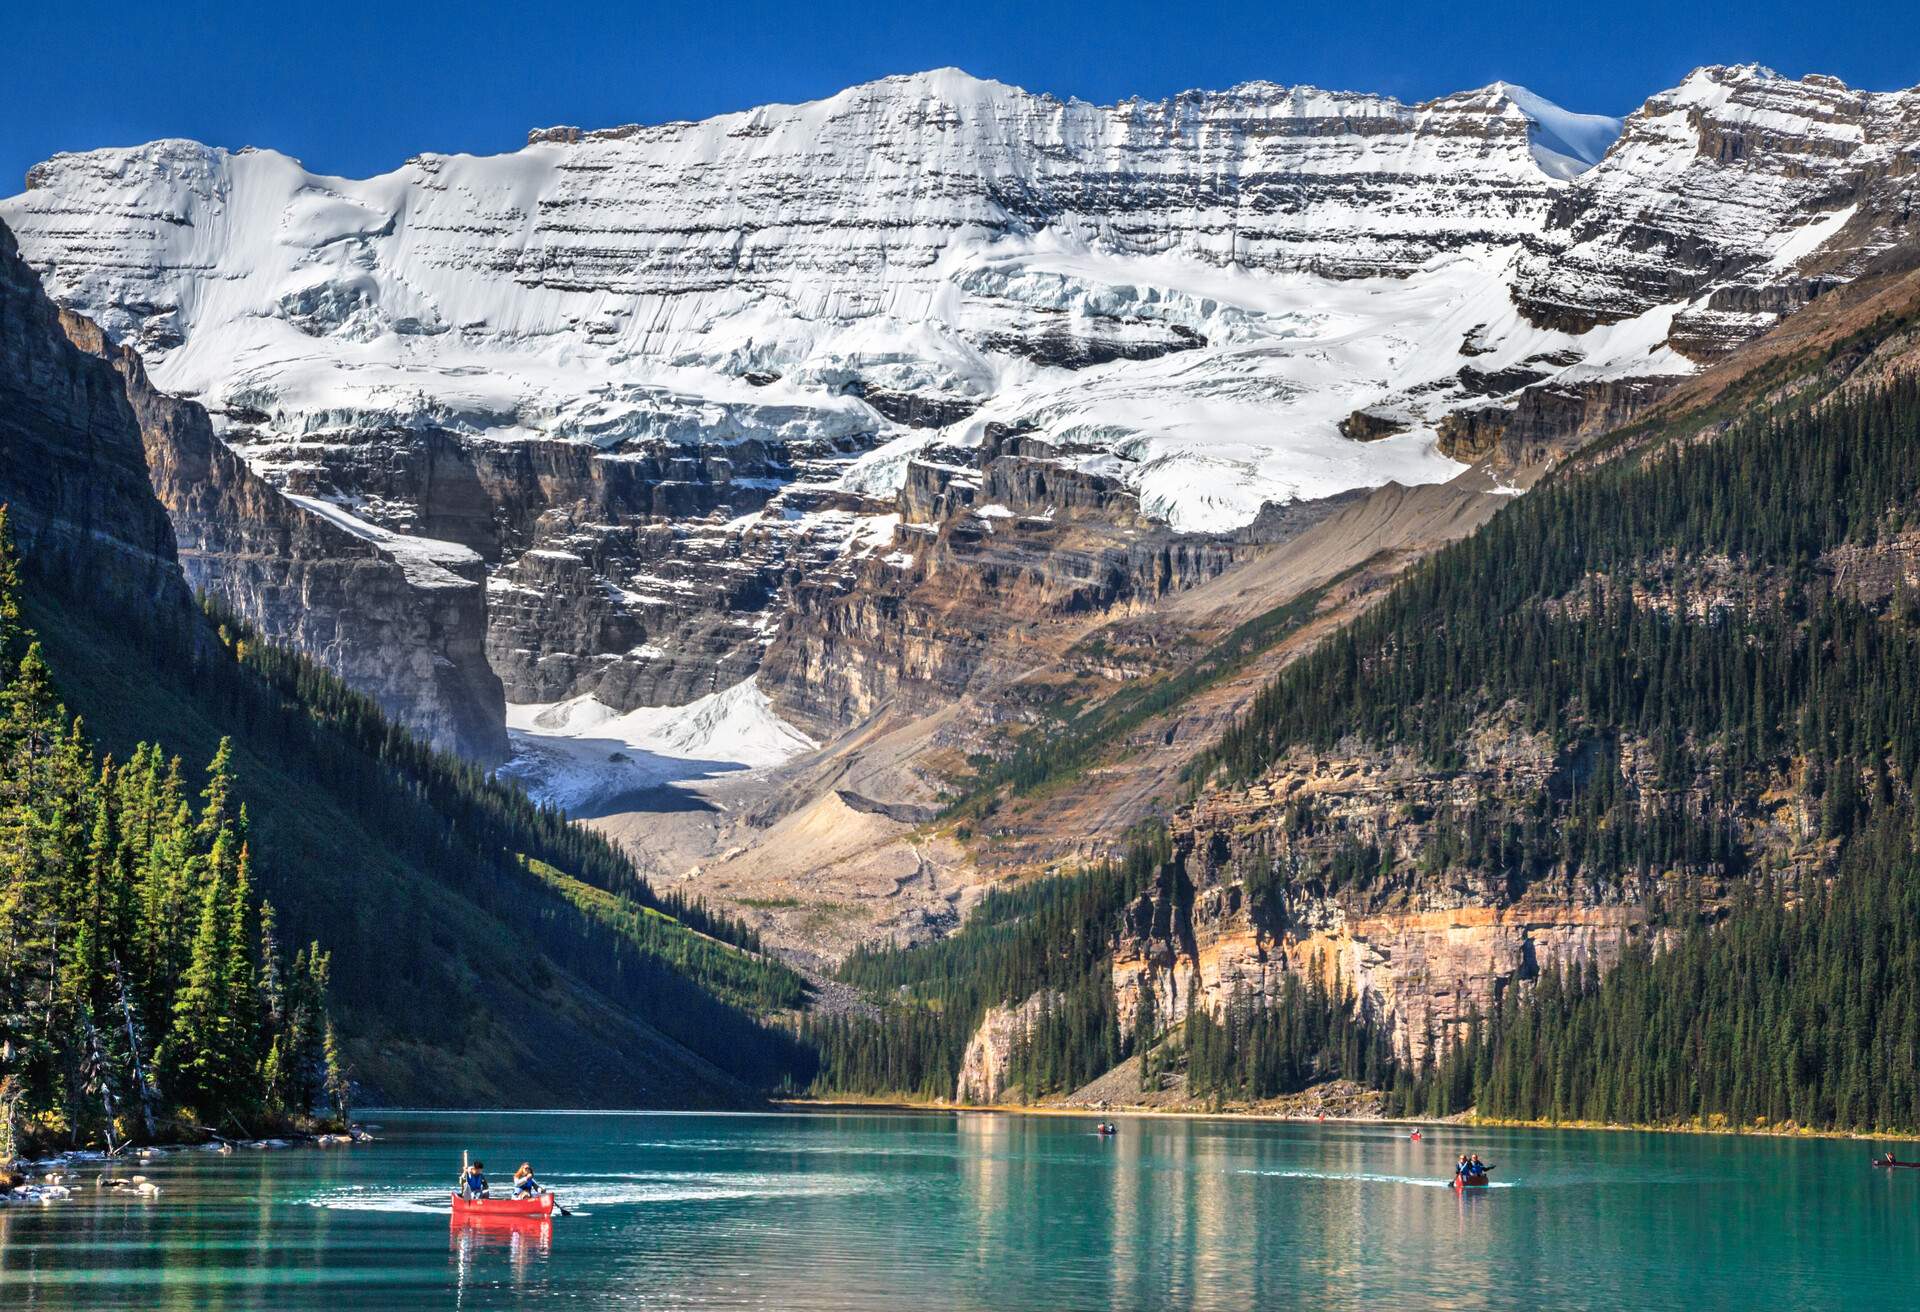 Tourists canoeing at Lake Louise, with Upper Victoria Glacier in background, situated in Banff National Park, Alberta province of Canada.